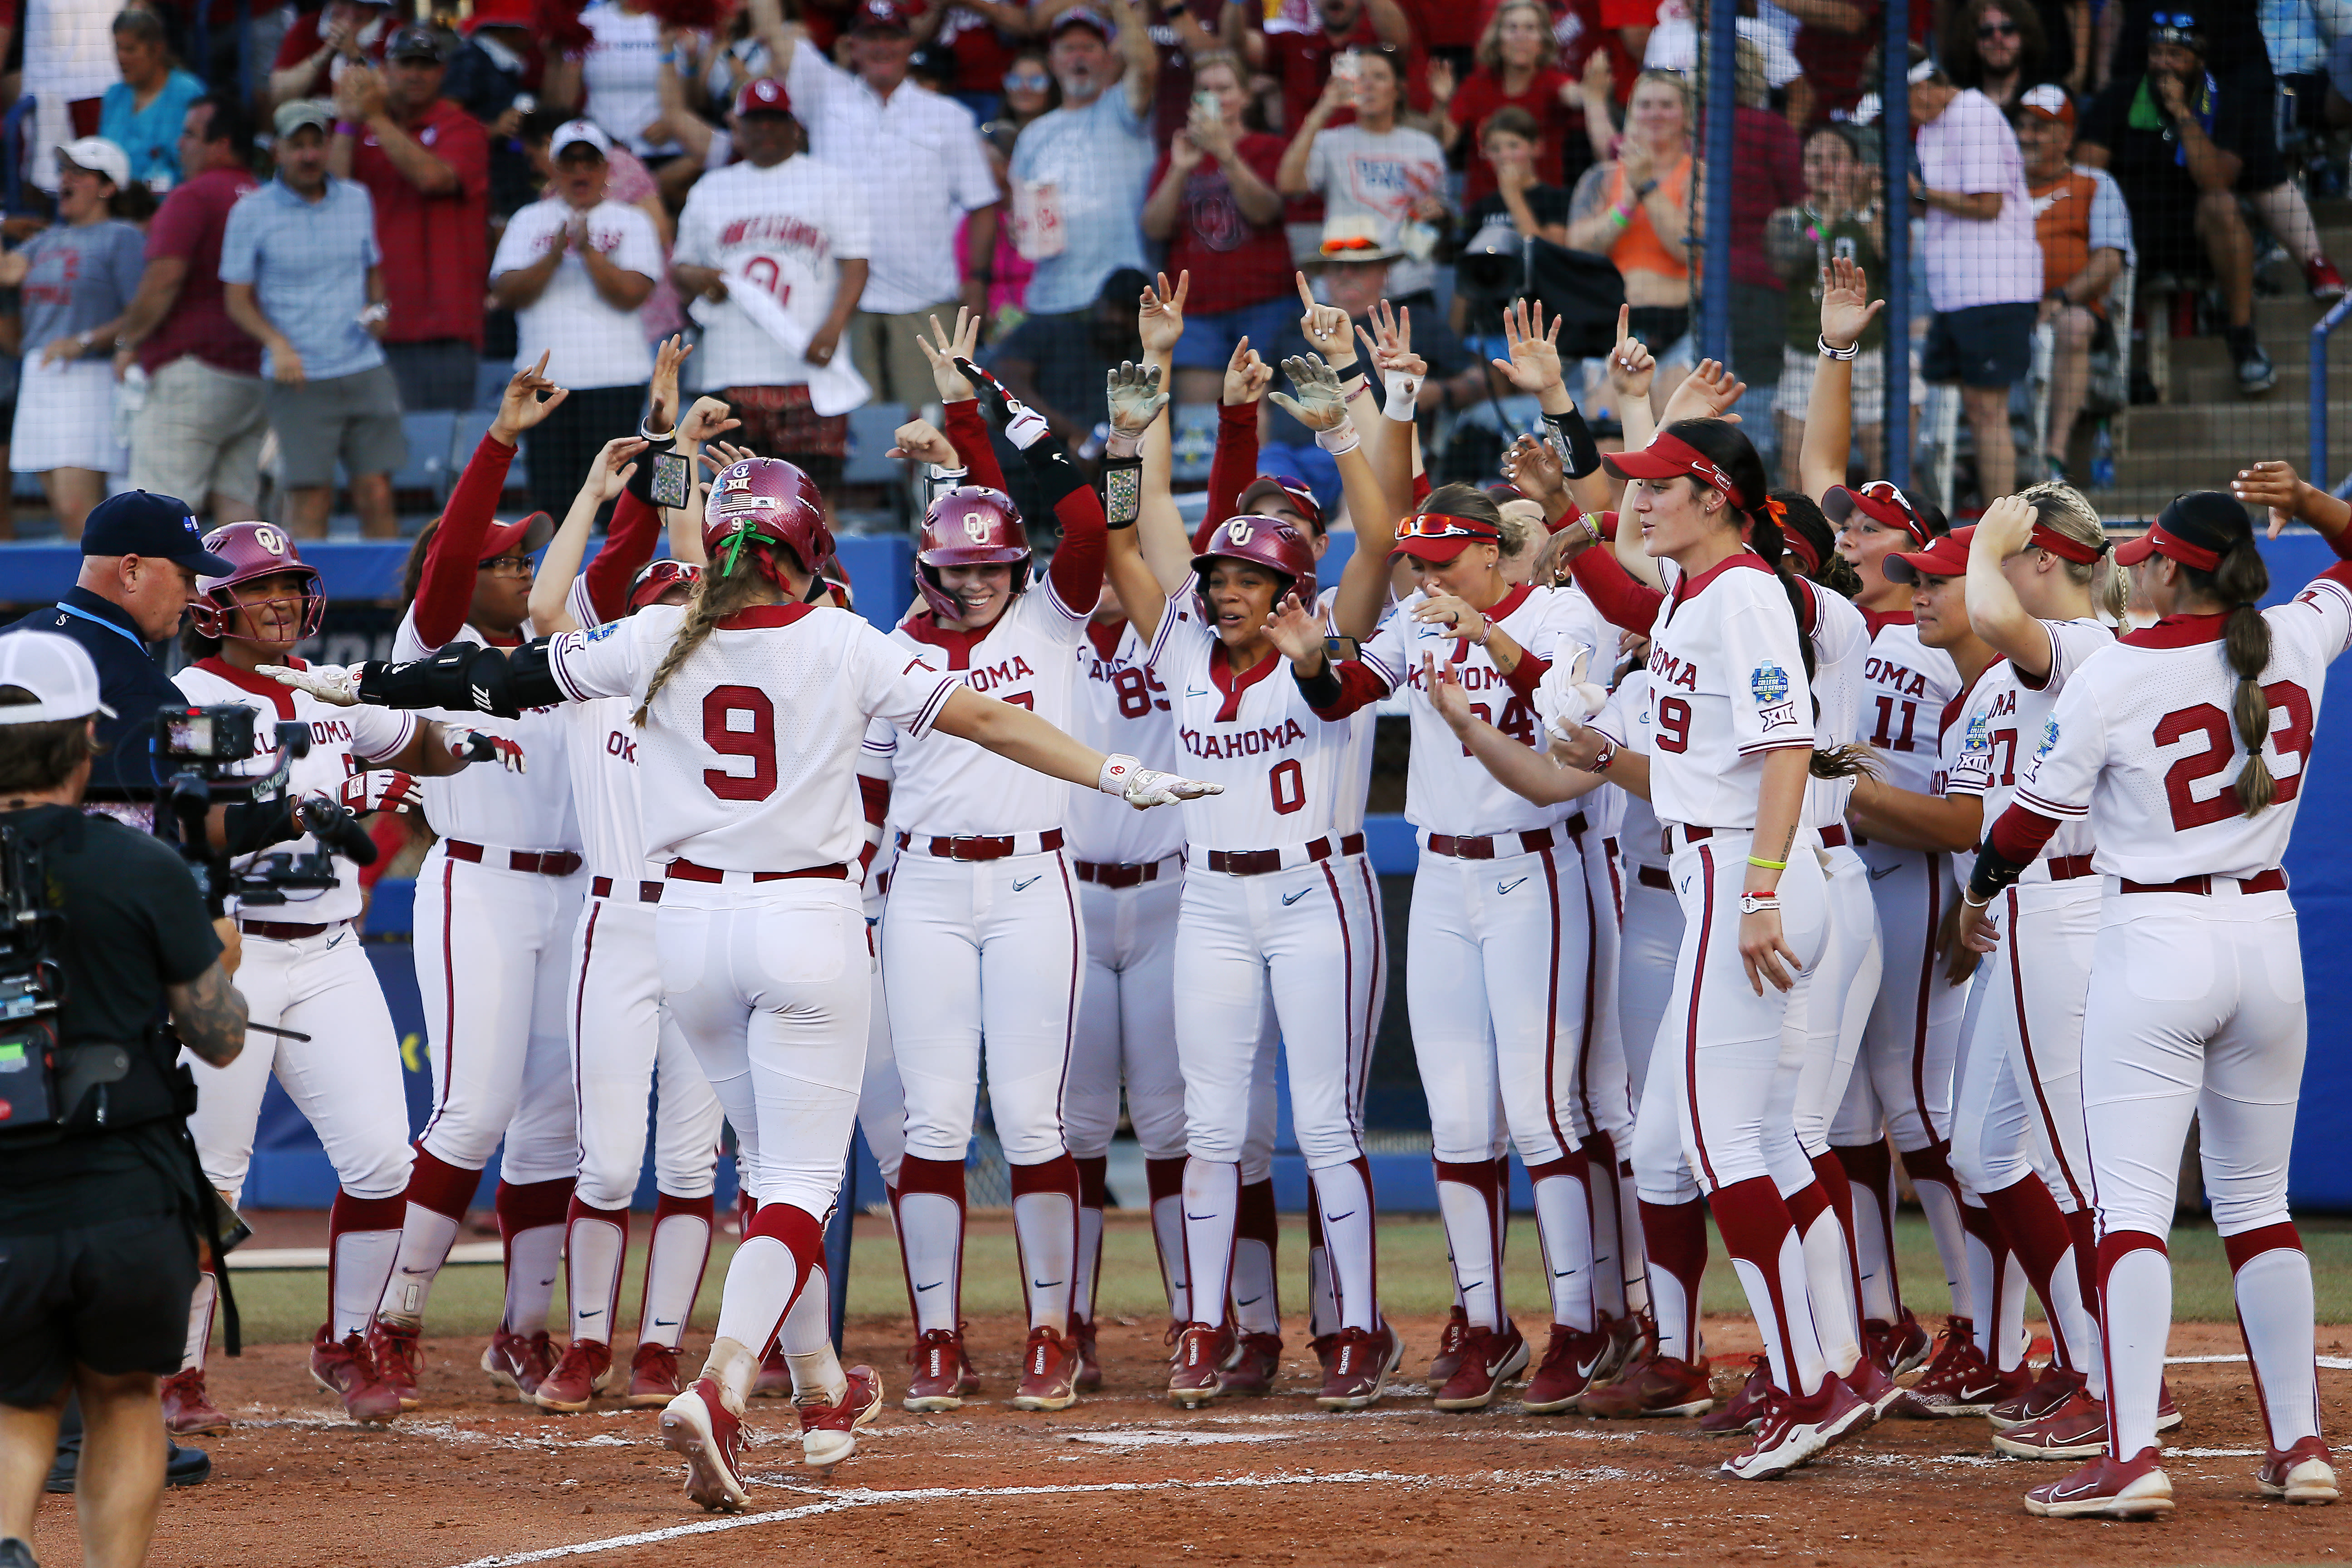 Oklahoma tees off on Texas pitching to take Game 1 of Women's College World Series